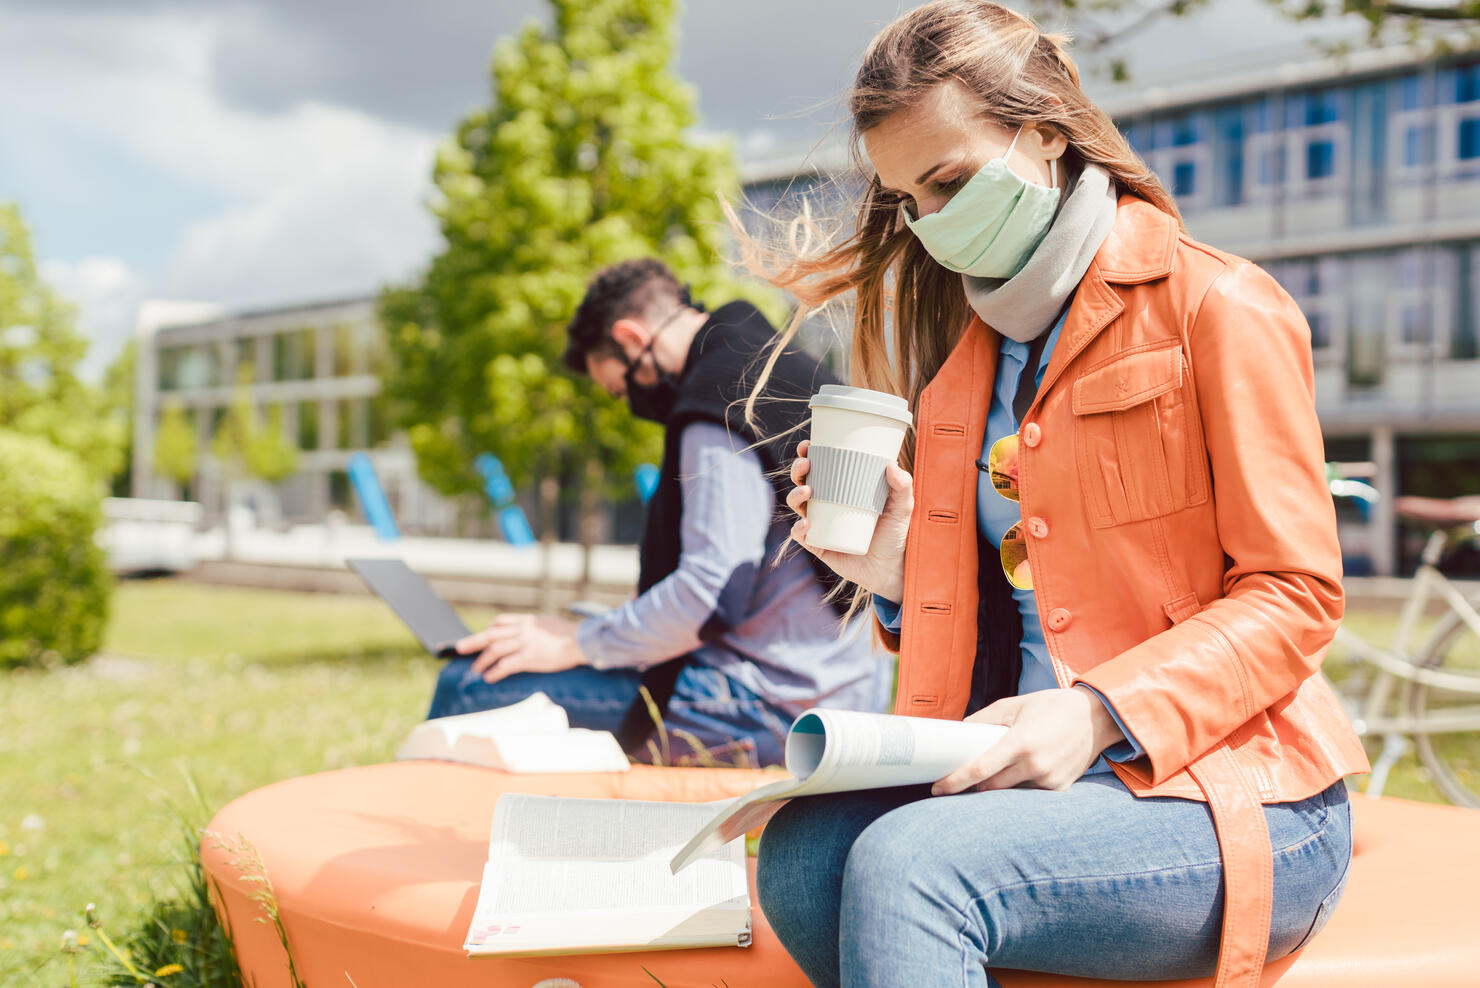 Woman student on college campus learning wearing face mask